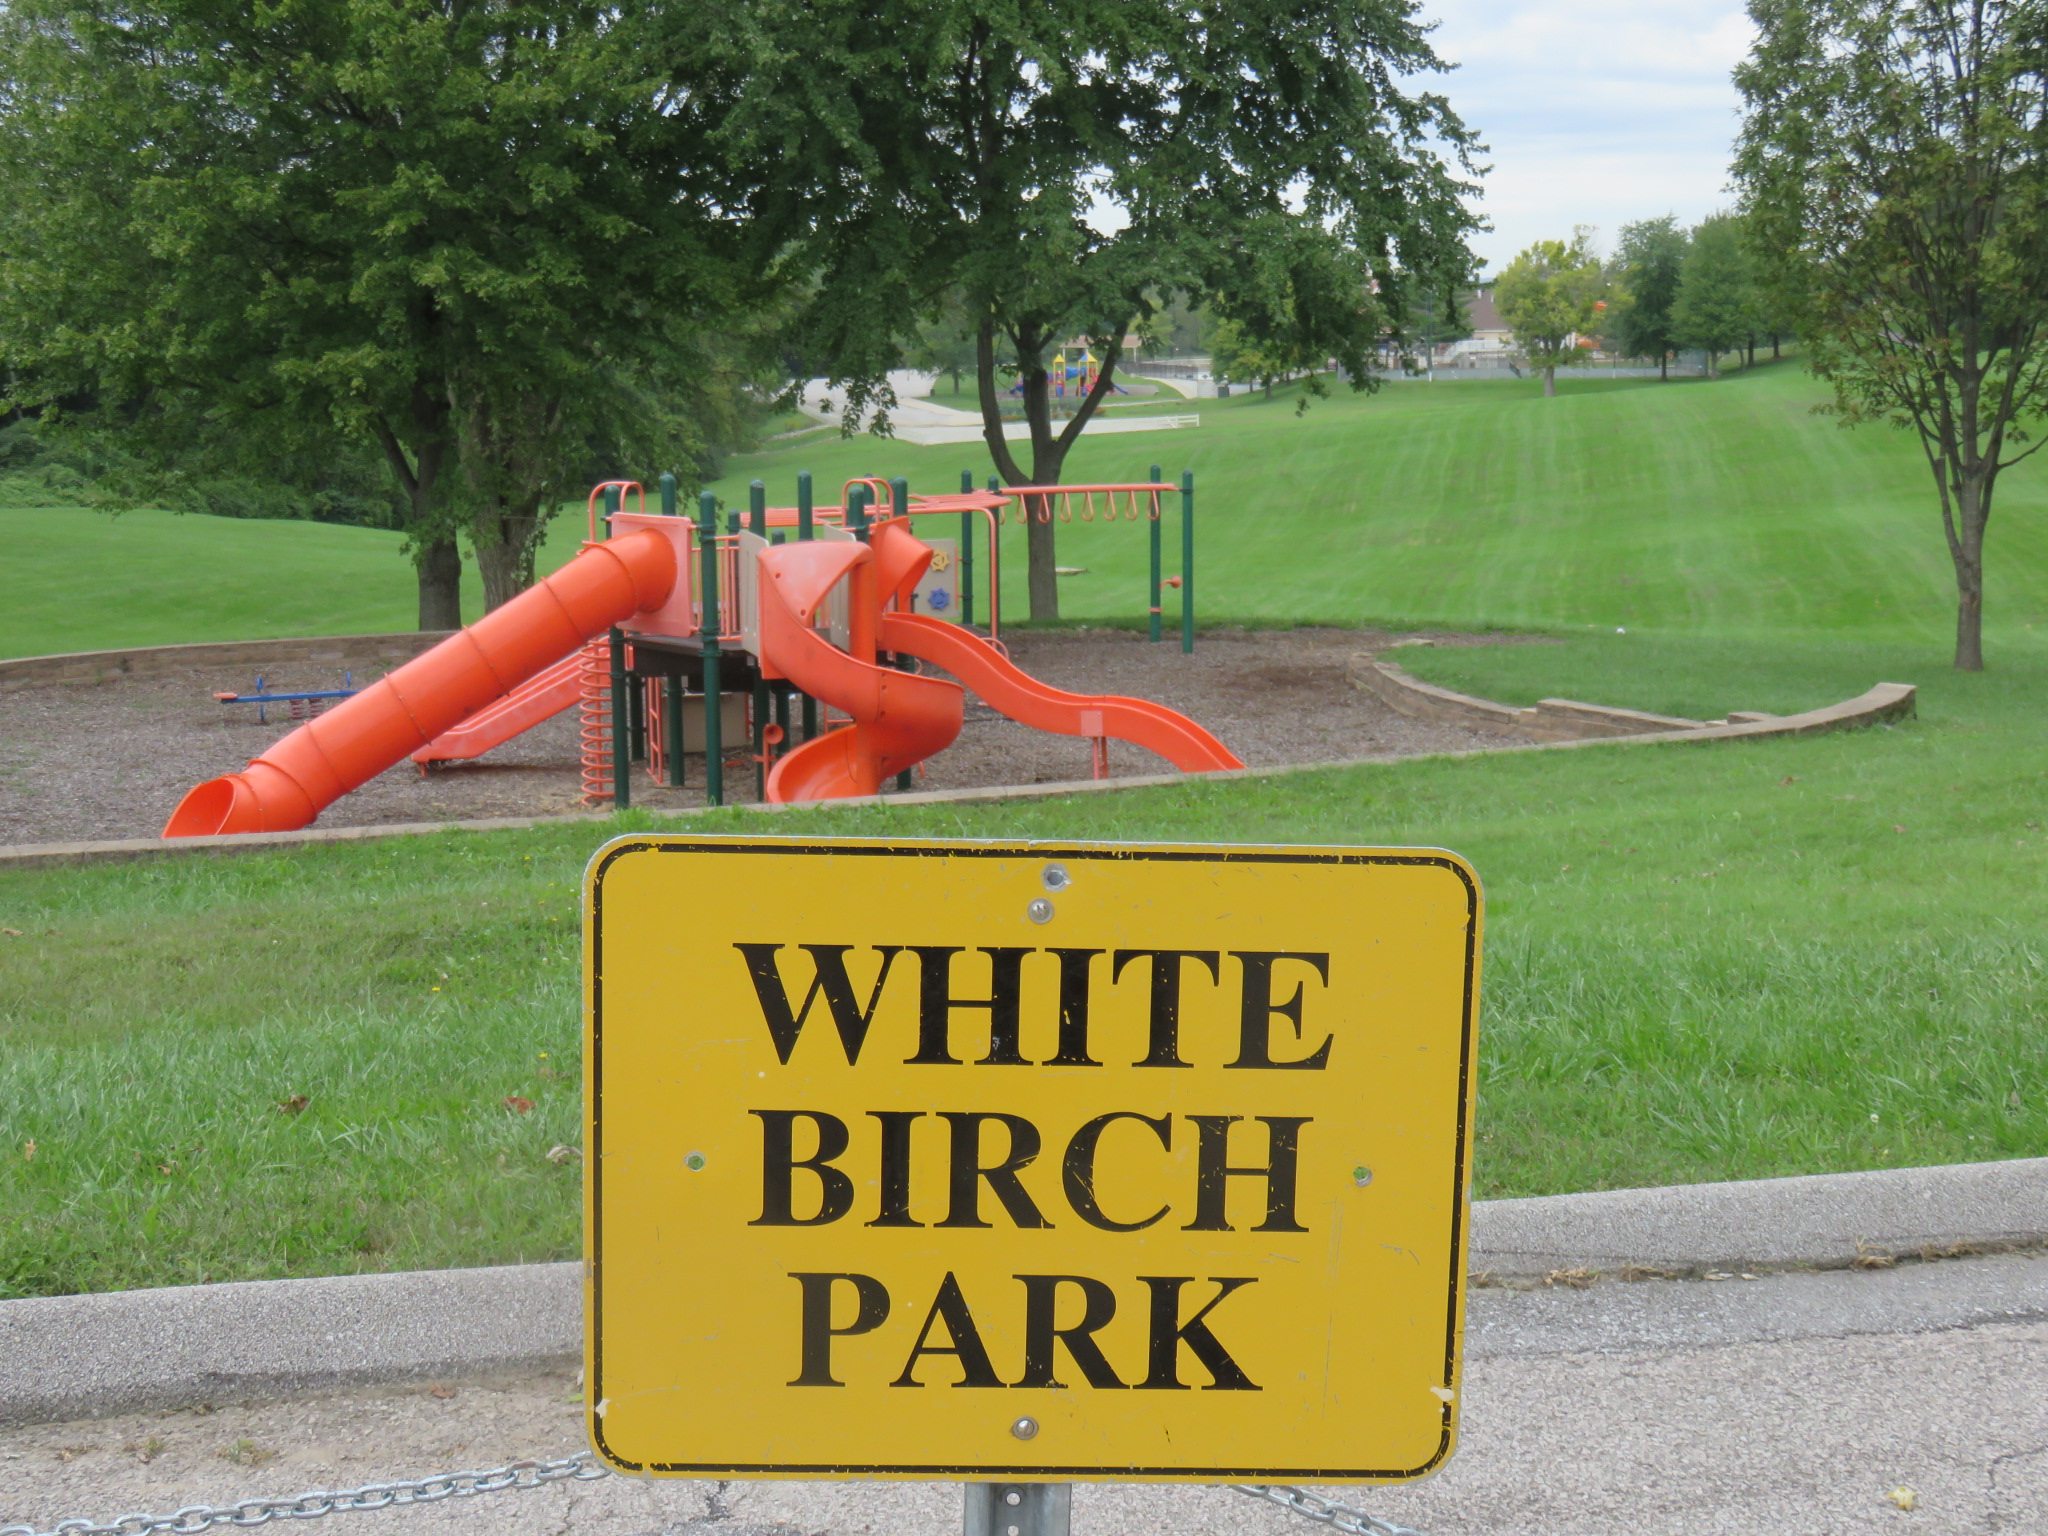 St. Louis in Pictures: White Birch Park